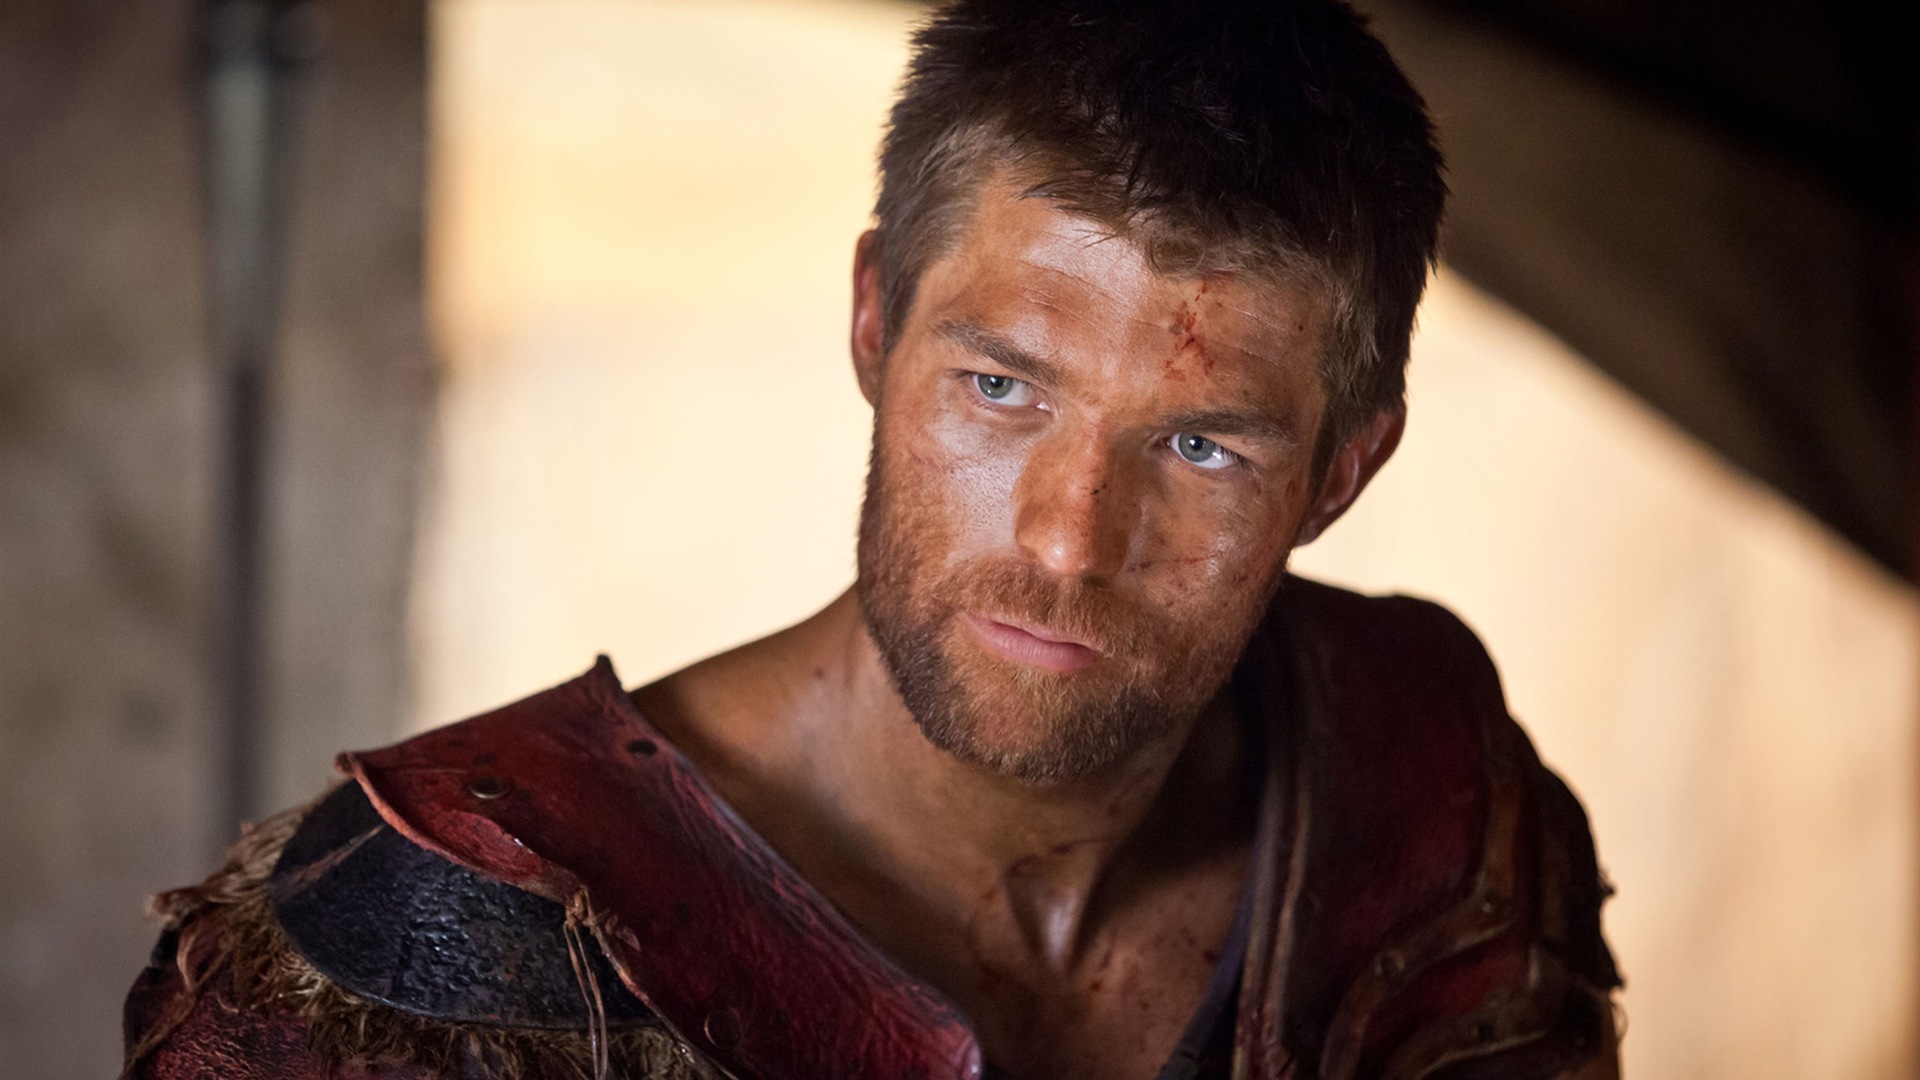 Spartacus: War of the Damned HD Wallpaper #11 - 1920x1080